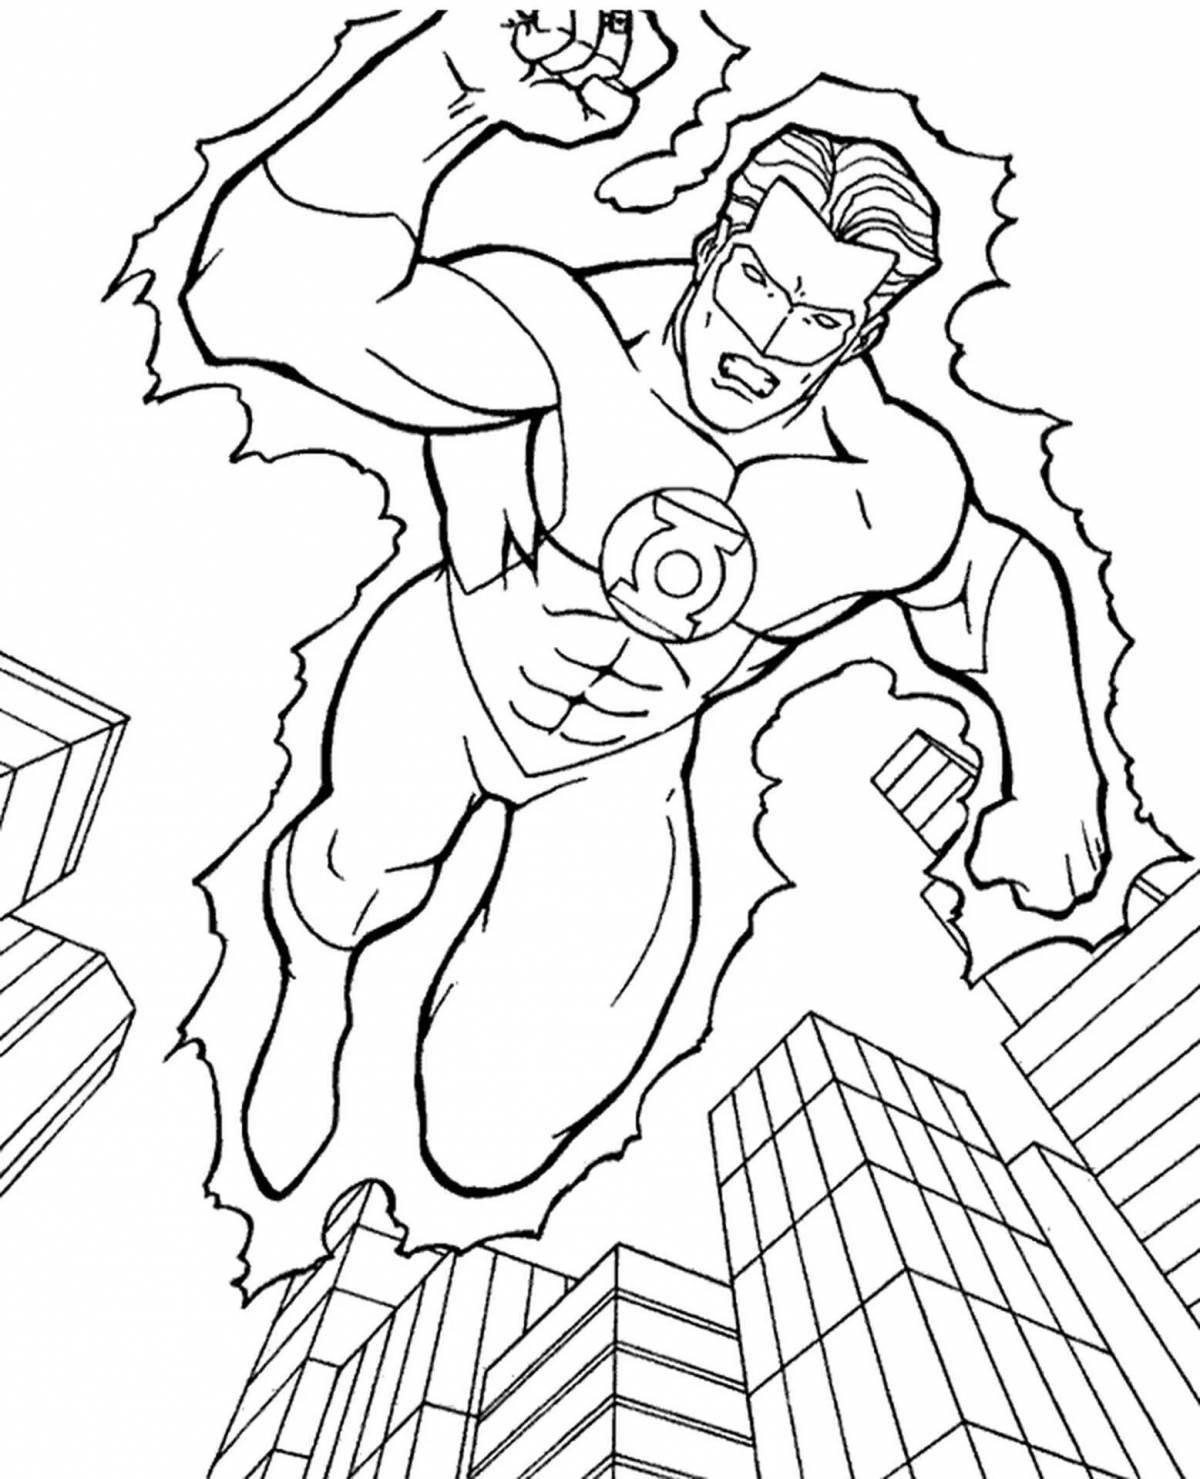 Radiant injustice 2 coloring page